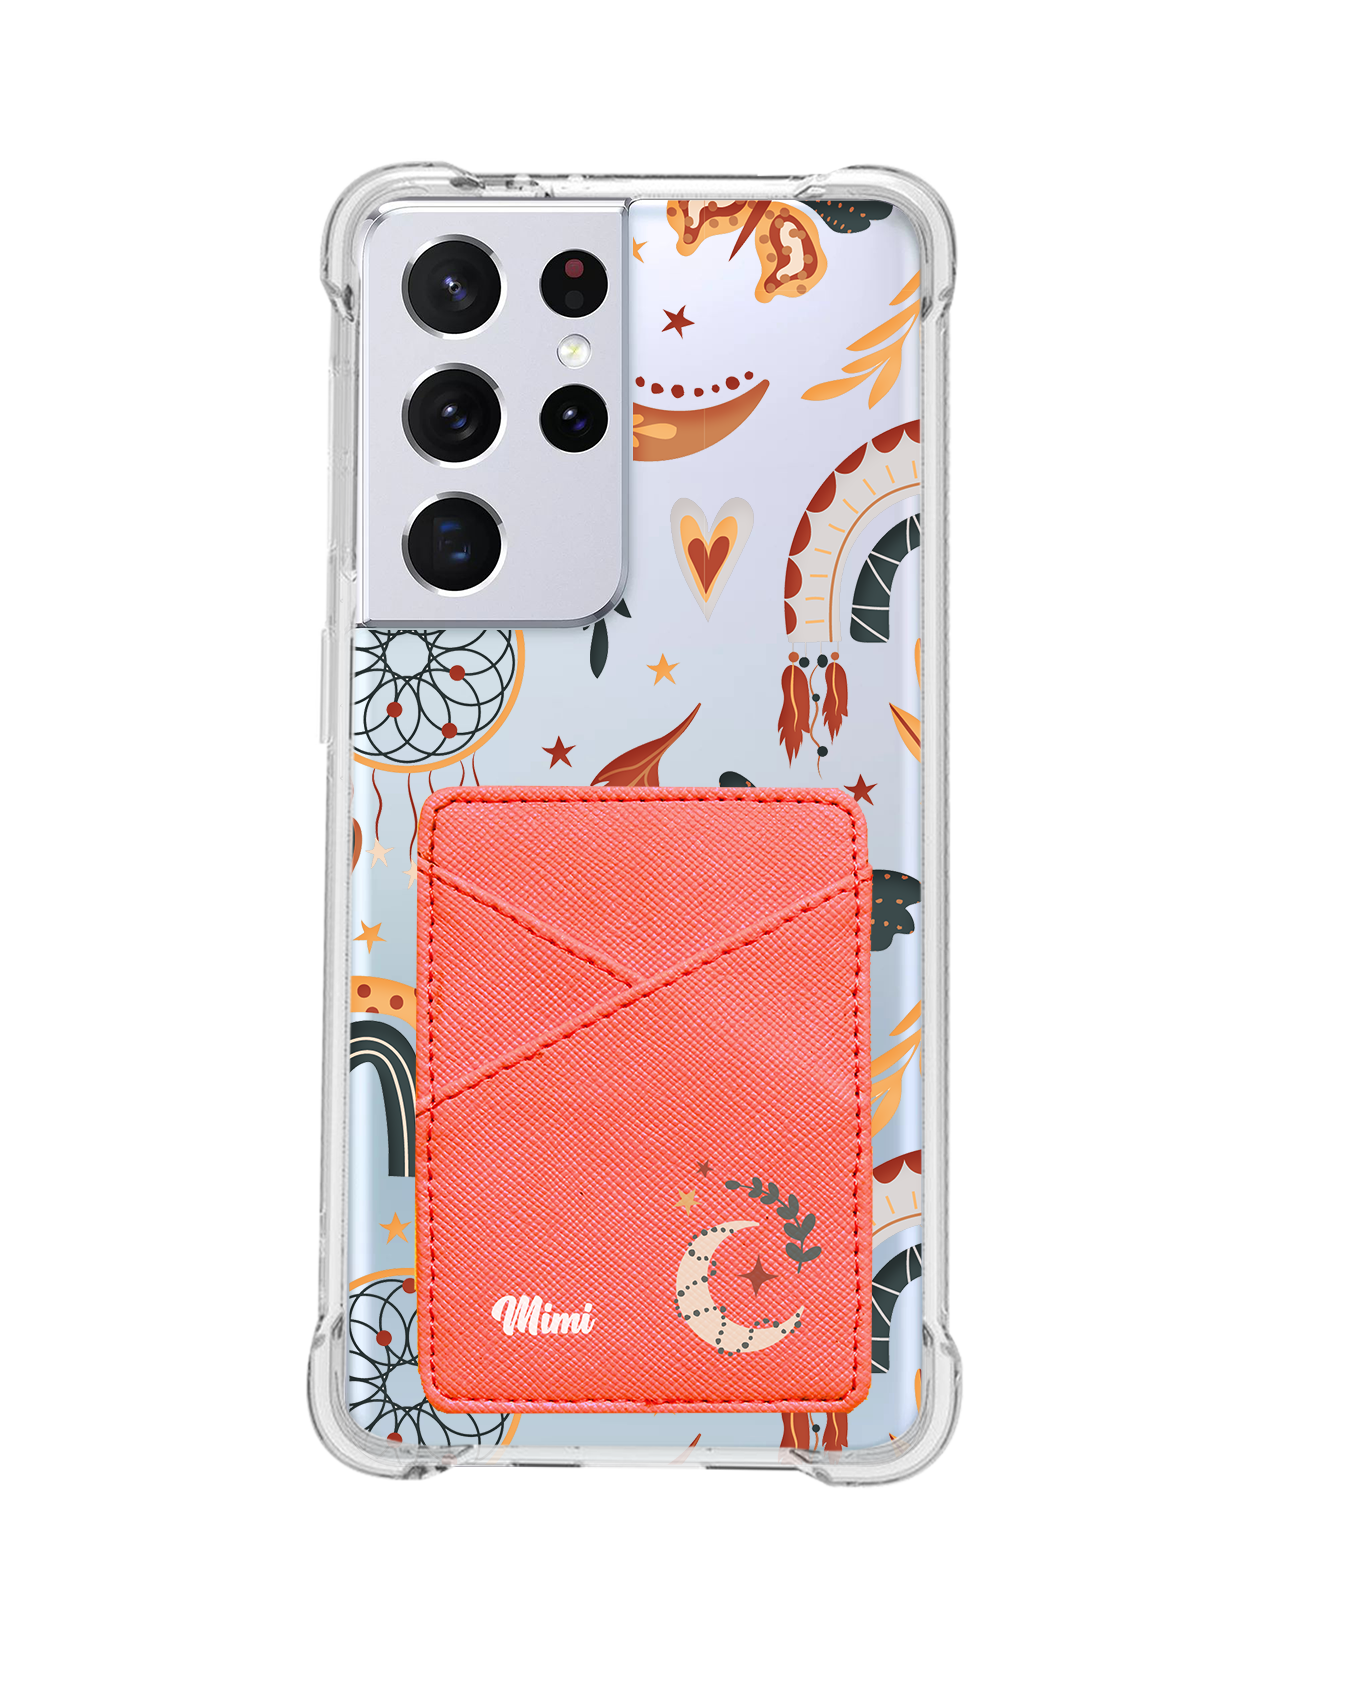 Android Phone Wallet Case - Boho 3.0